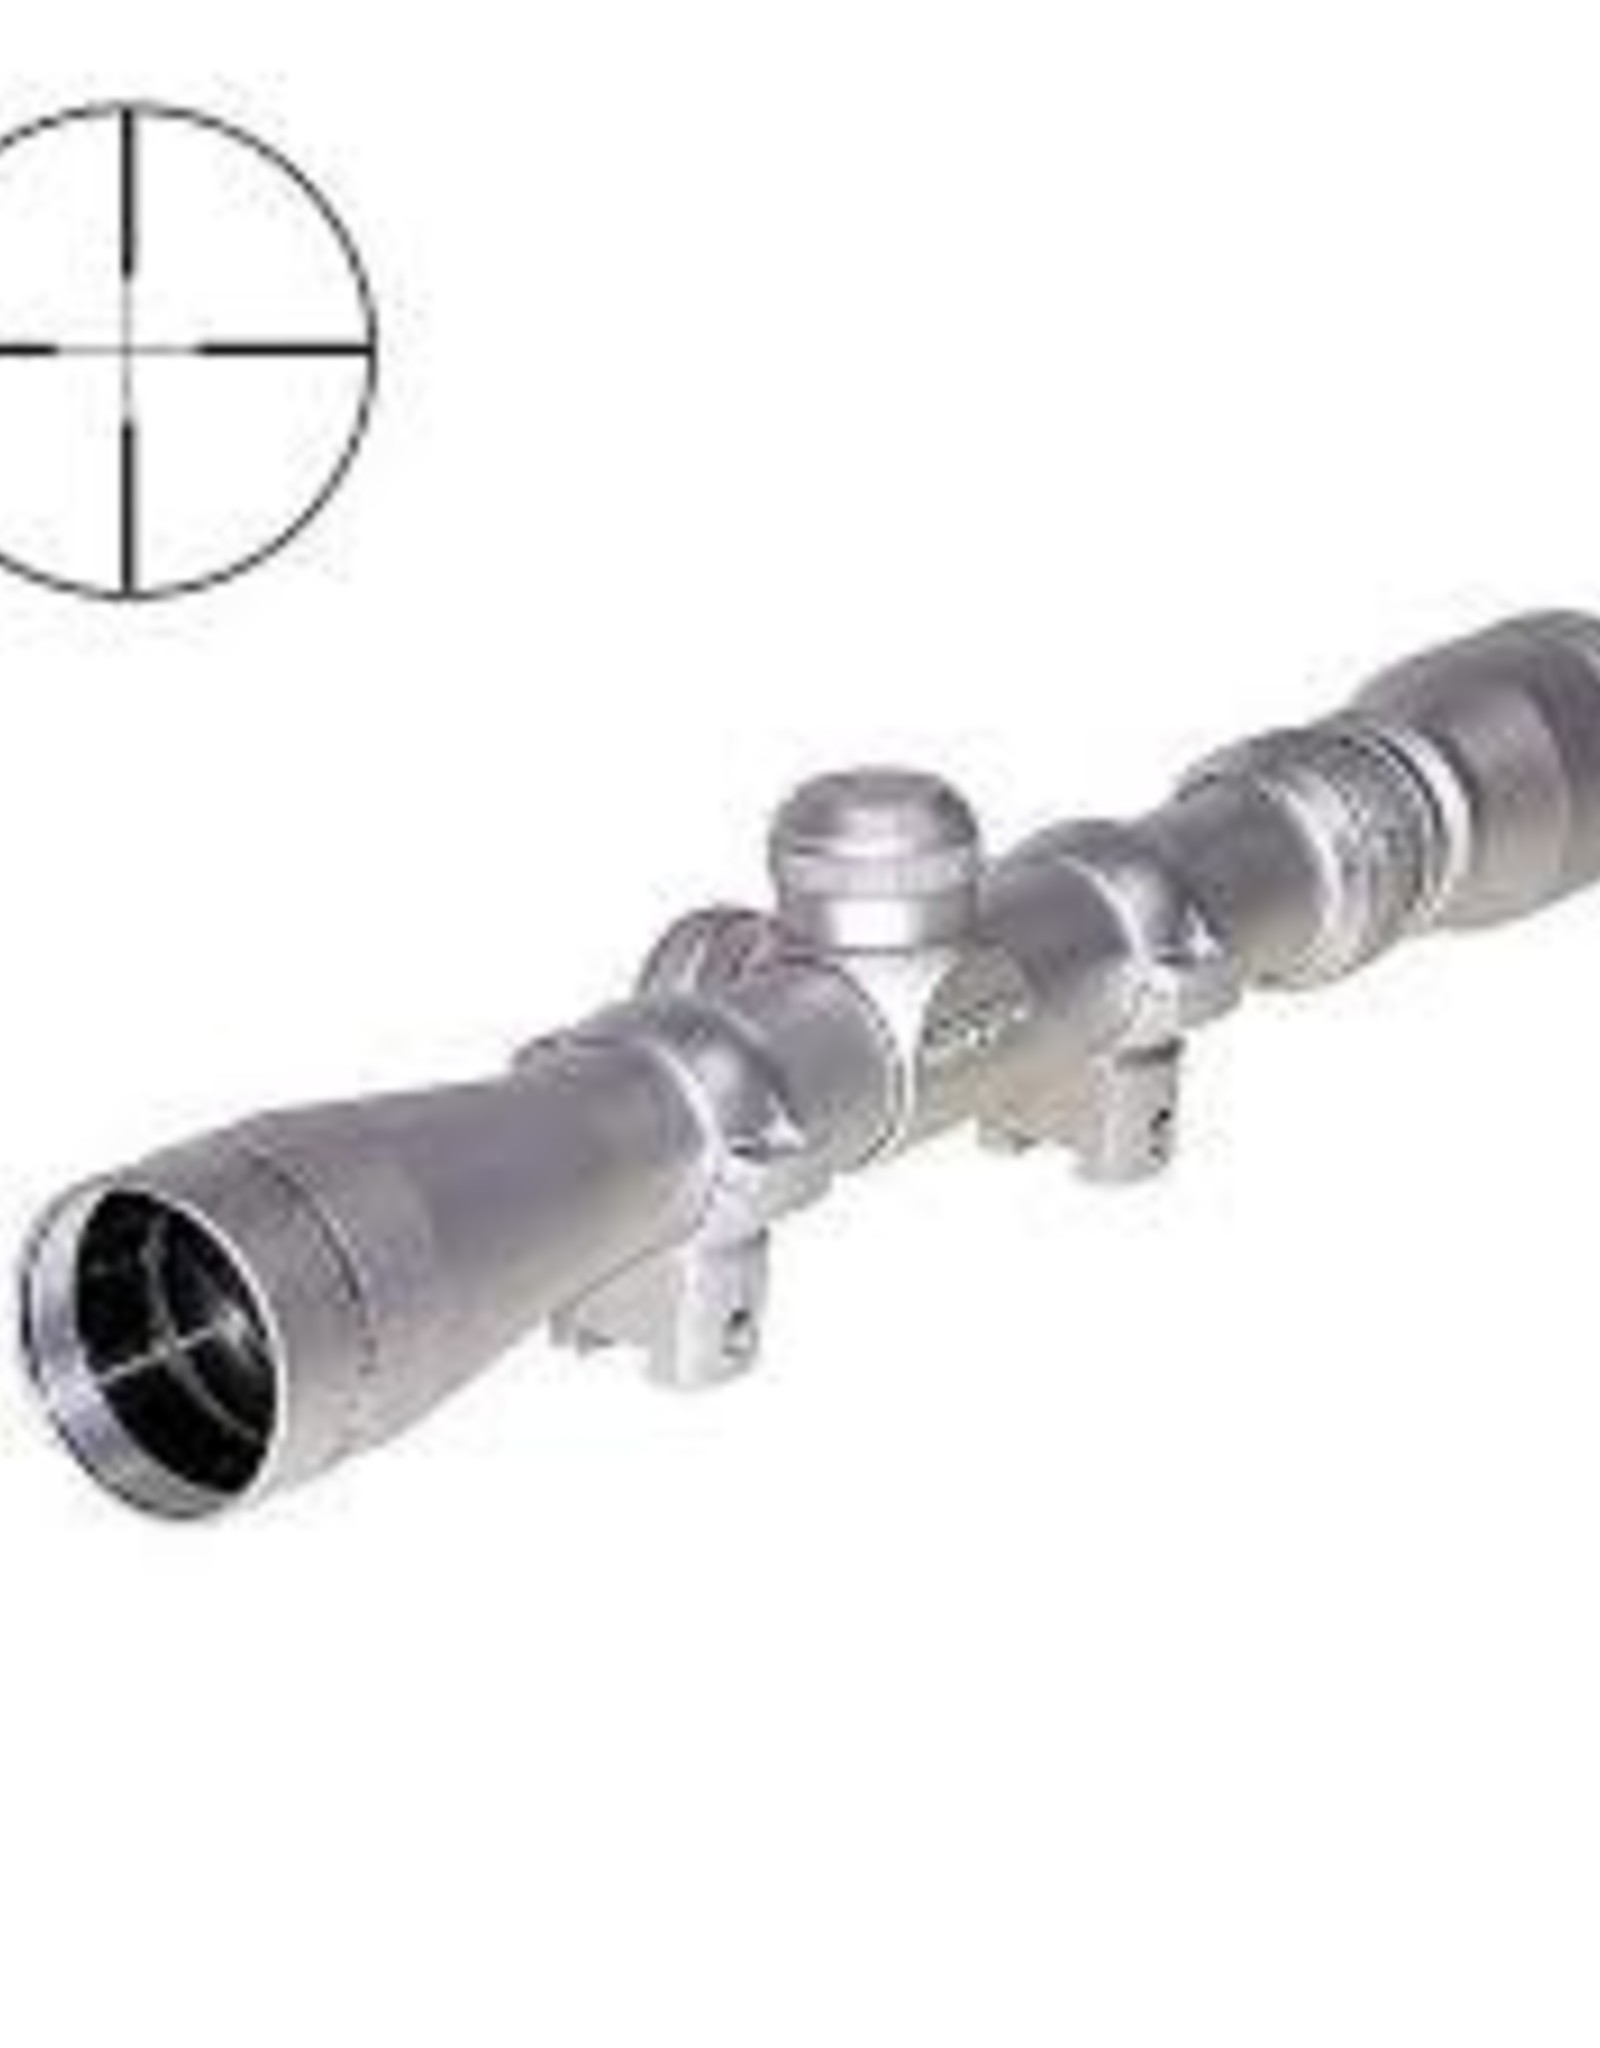 Simmons 22MAG 3-9X32 SCOPE W/RINGS